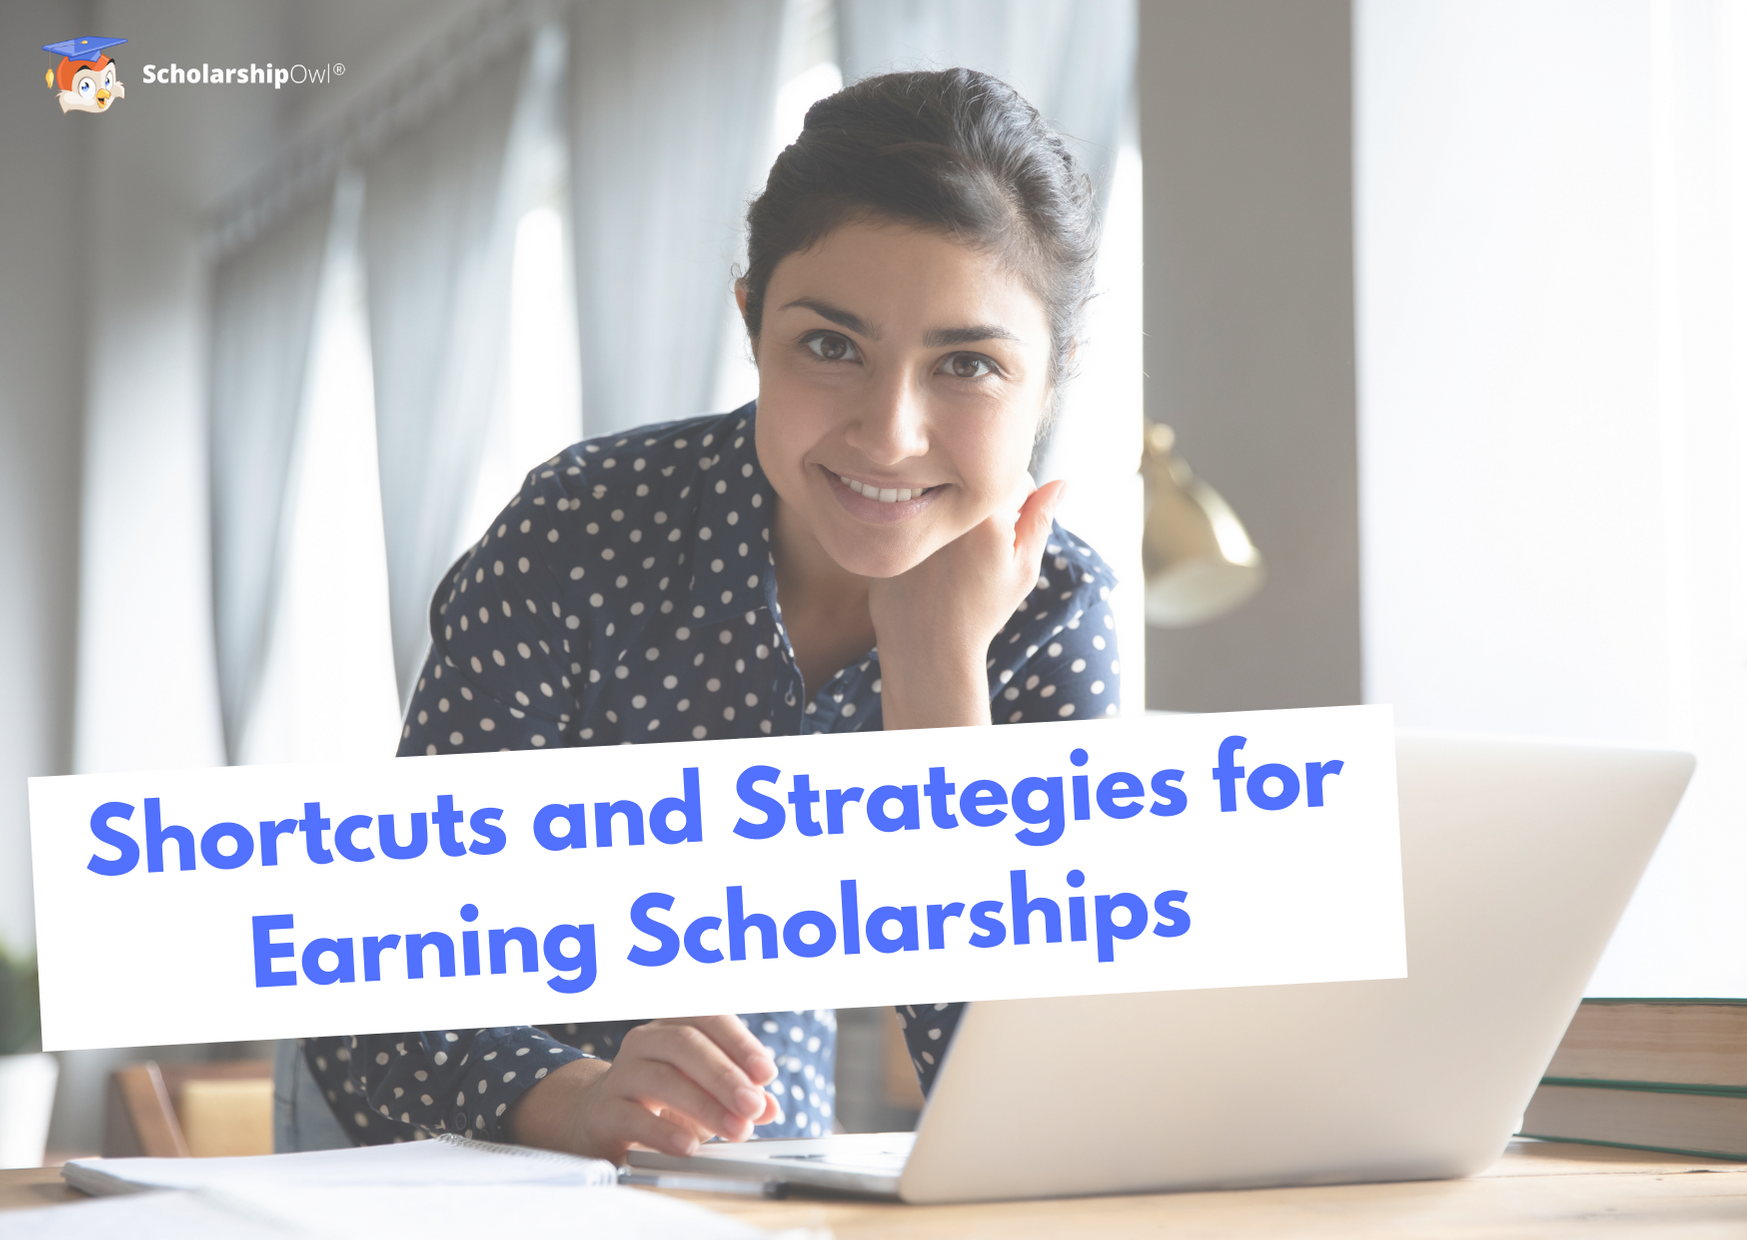 Shortcuts and Strategies for Earning Scholarships